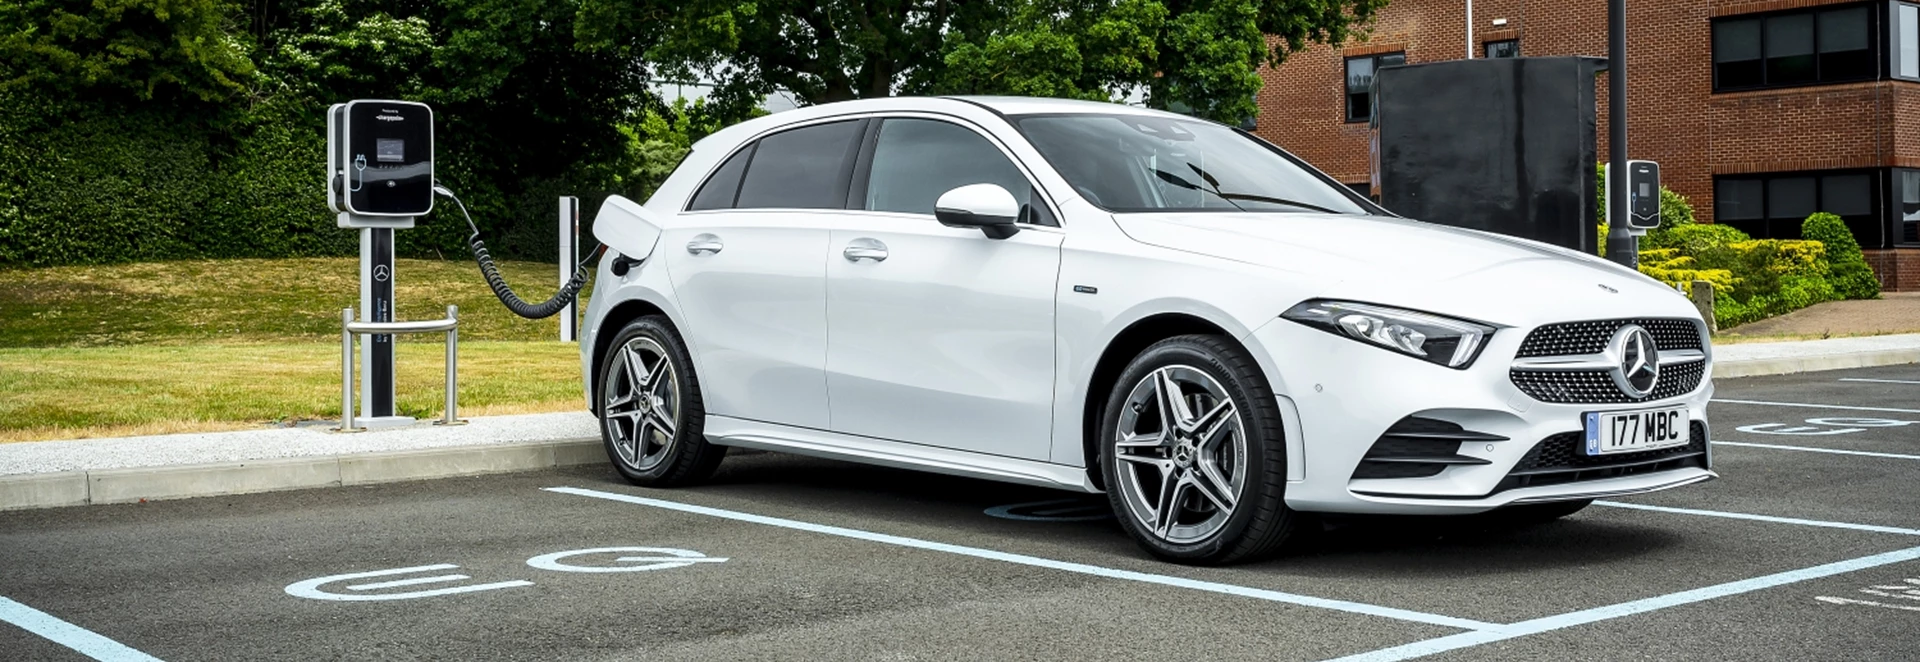 Mercedes A 250 e plug-in hybrid 2021 review 